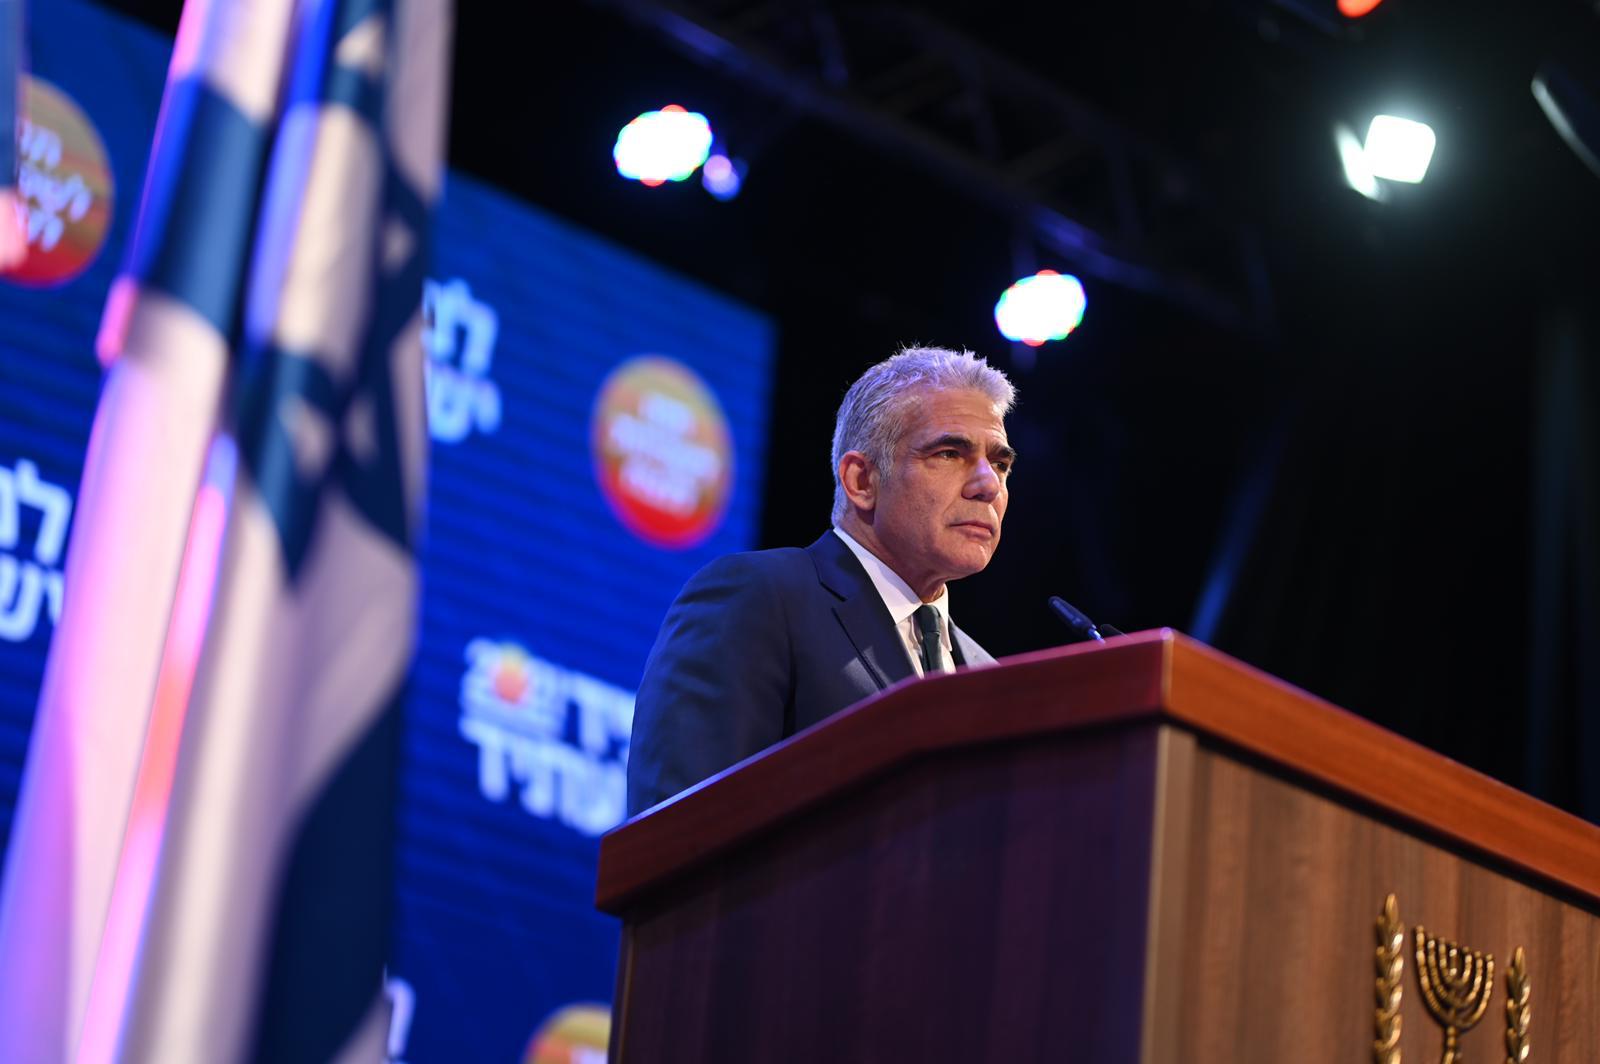 Undecided Elections Again Leave Israel With Impossible Political Conundrum